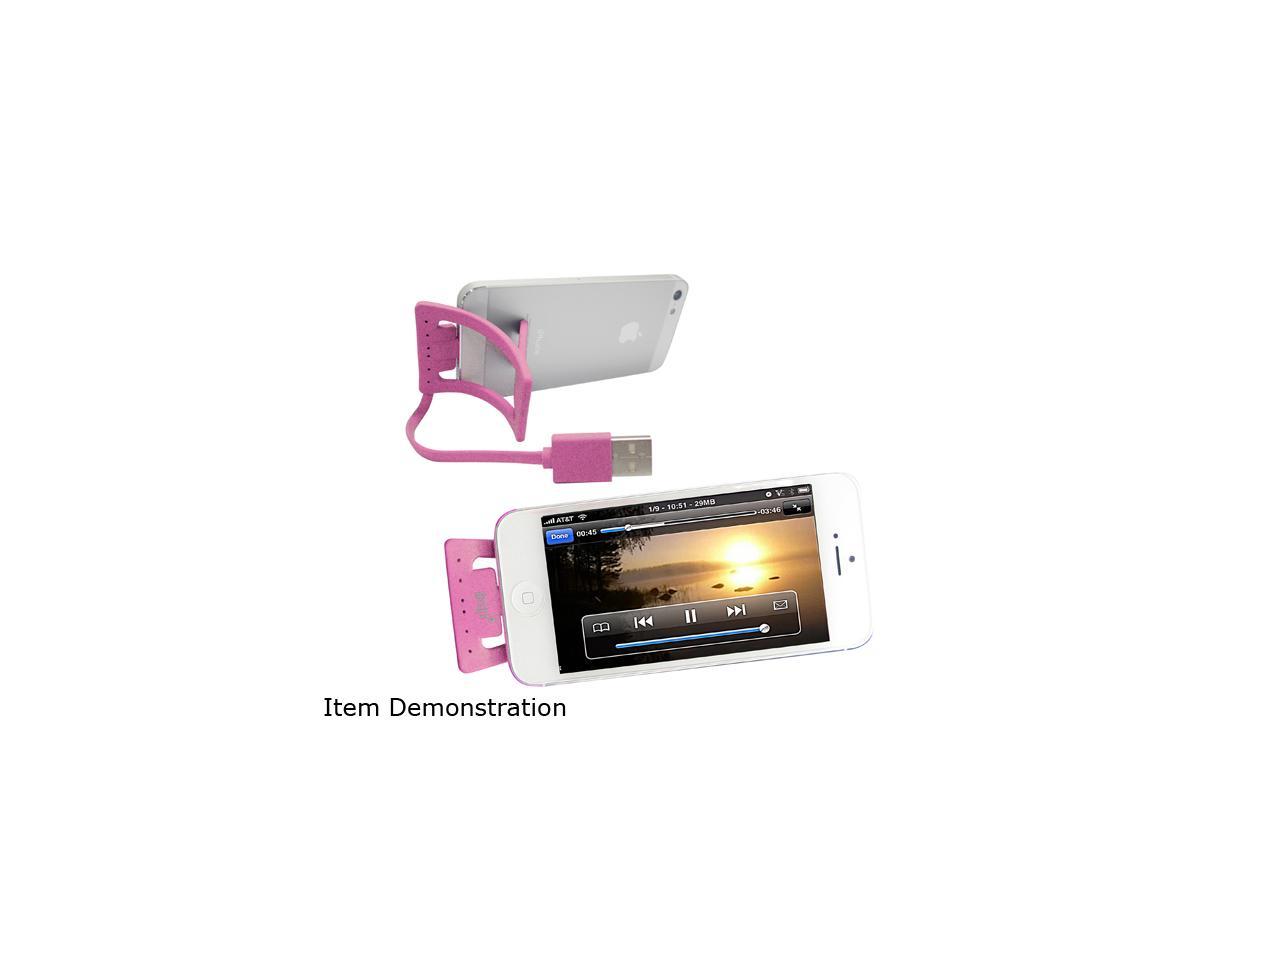 PQI 6PCJ-008R0004A Pink i-Cable Stand Apple Certified MFI iPhone Stand with Lightning Connector